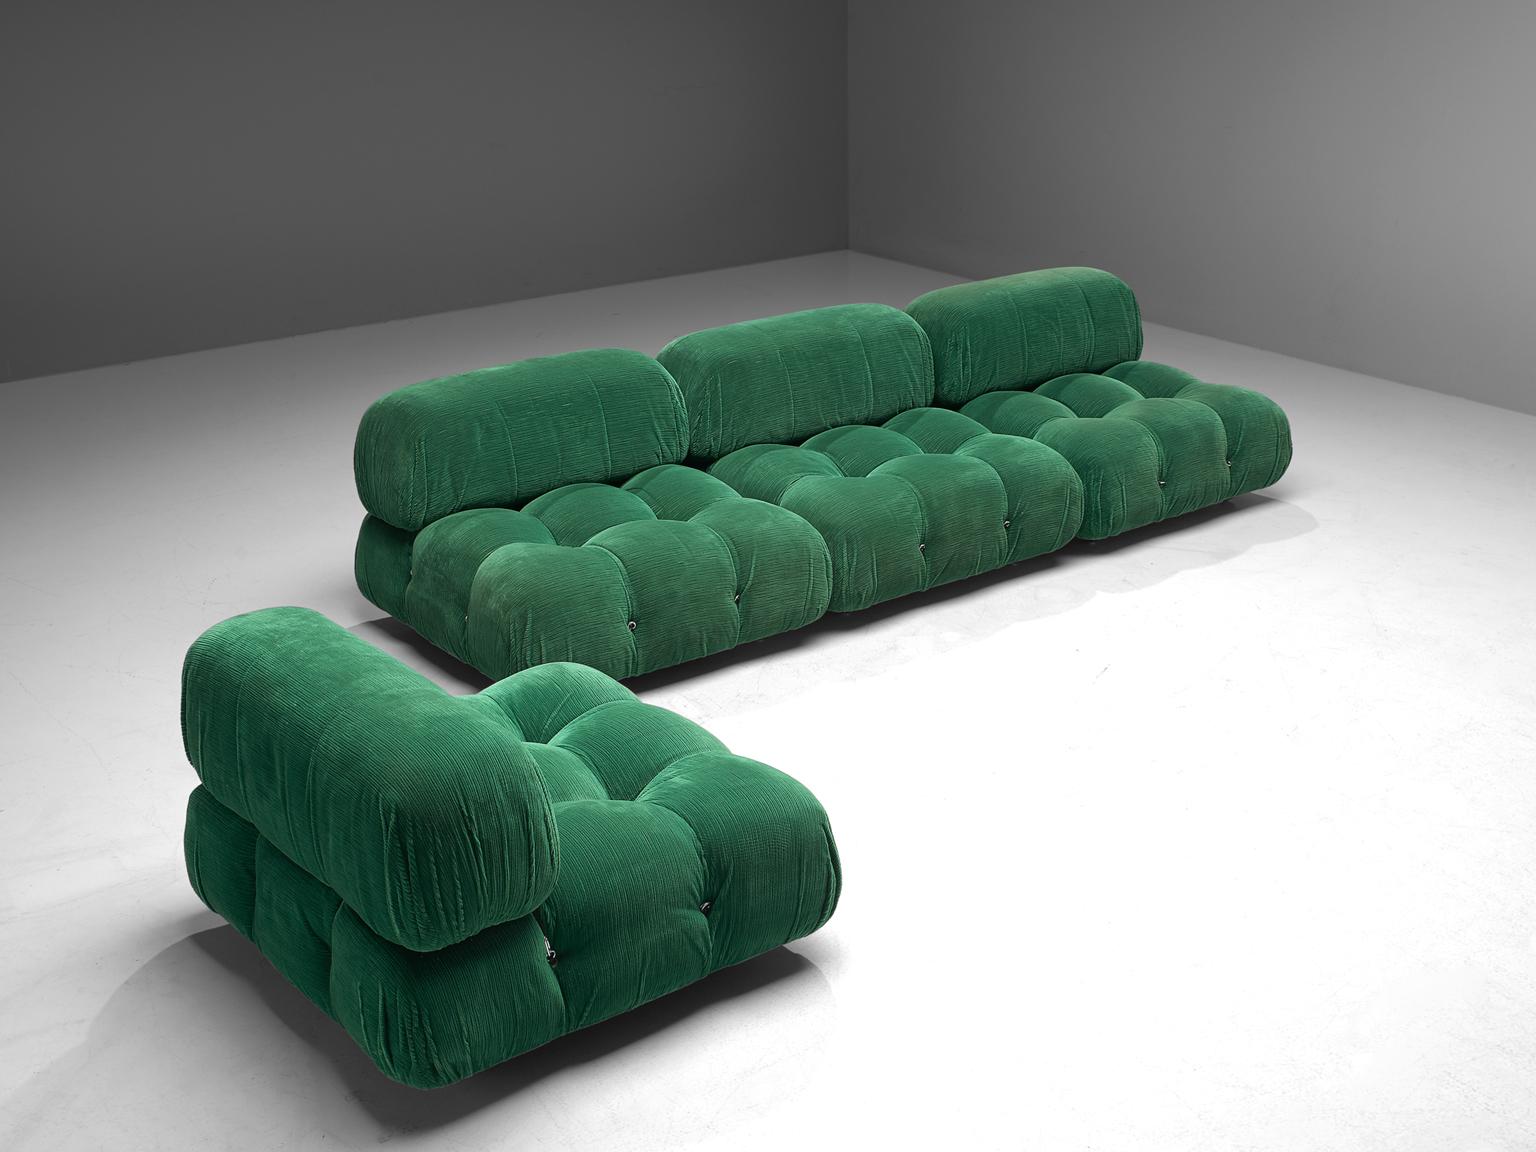 Mario Bellini, 'Camaleonda' sofa, in original green corduroy, Italy, 1972.

This sofa is designed by Mario Bellini for B&B Italia and C&B Italia. It can also be customized on request in our upholstery atelier. The sectional elements this sofa was